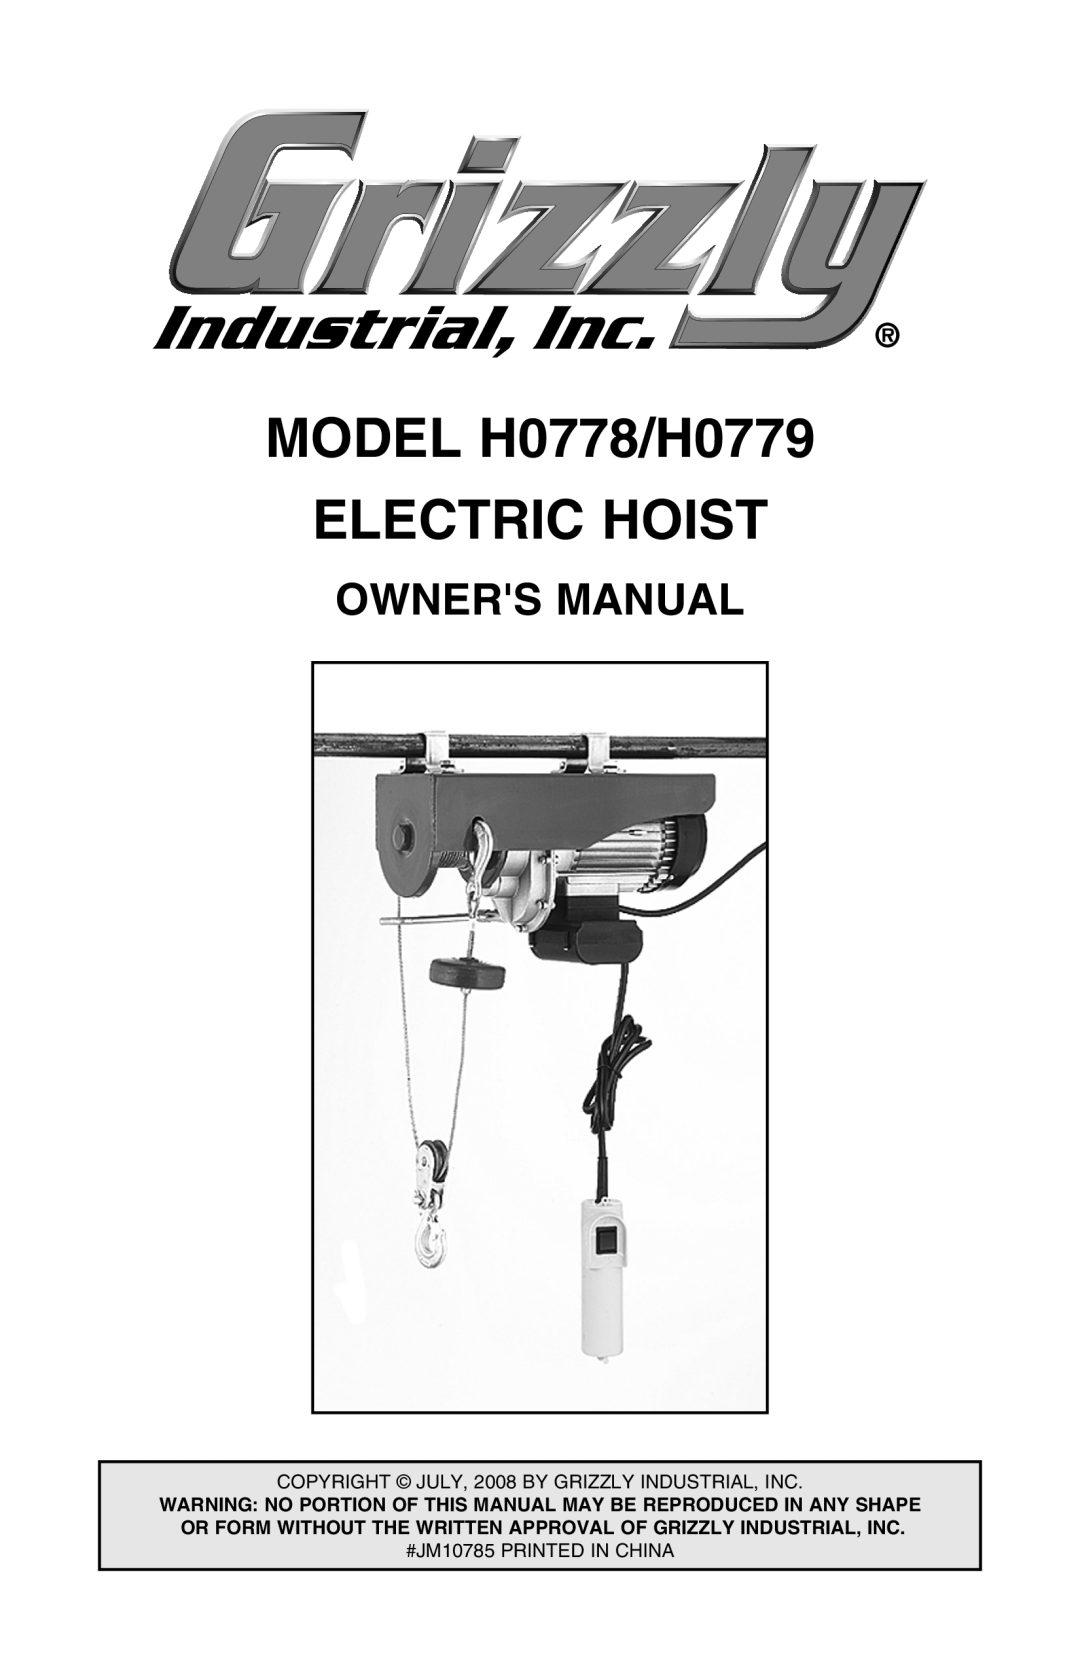 Grizzly owner manual MODEL H0778/H0779, Electric Hoist, Owners Manual 